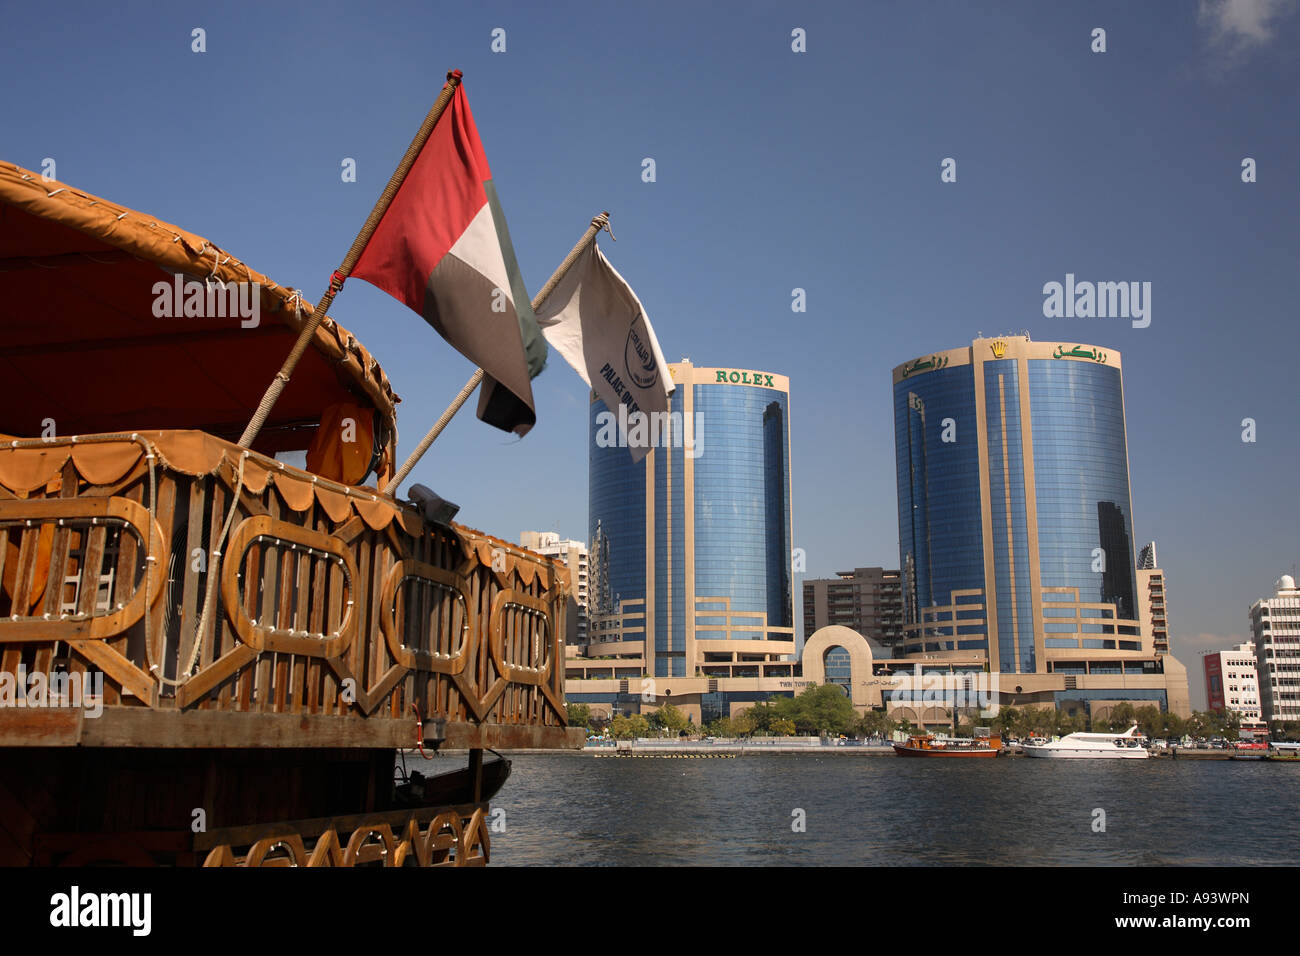 Old dhow and high rise buildings the Rolex Towers The Creek City Centre  Dubai United Arab Emirates Stock Photo - Alamy